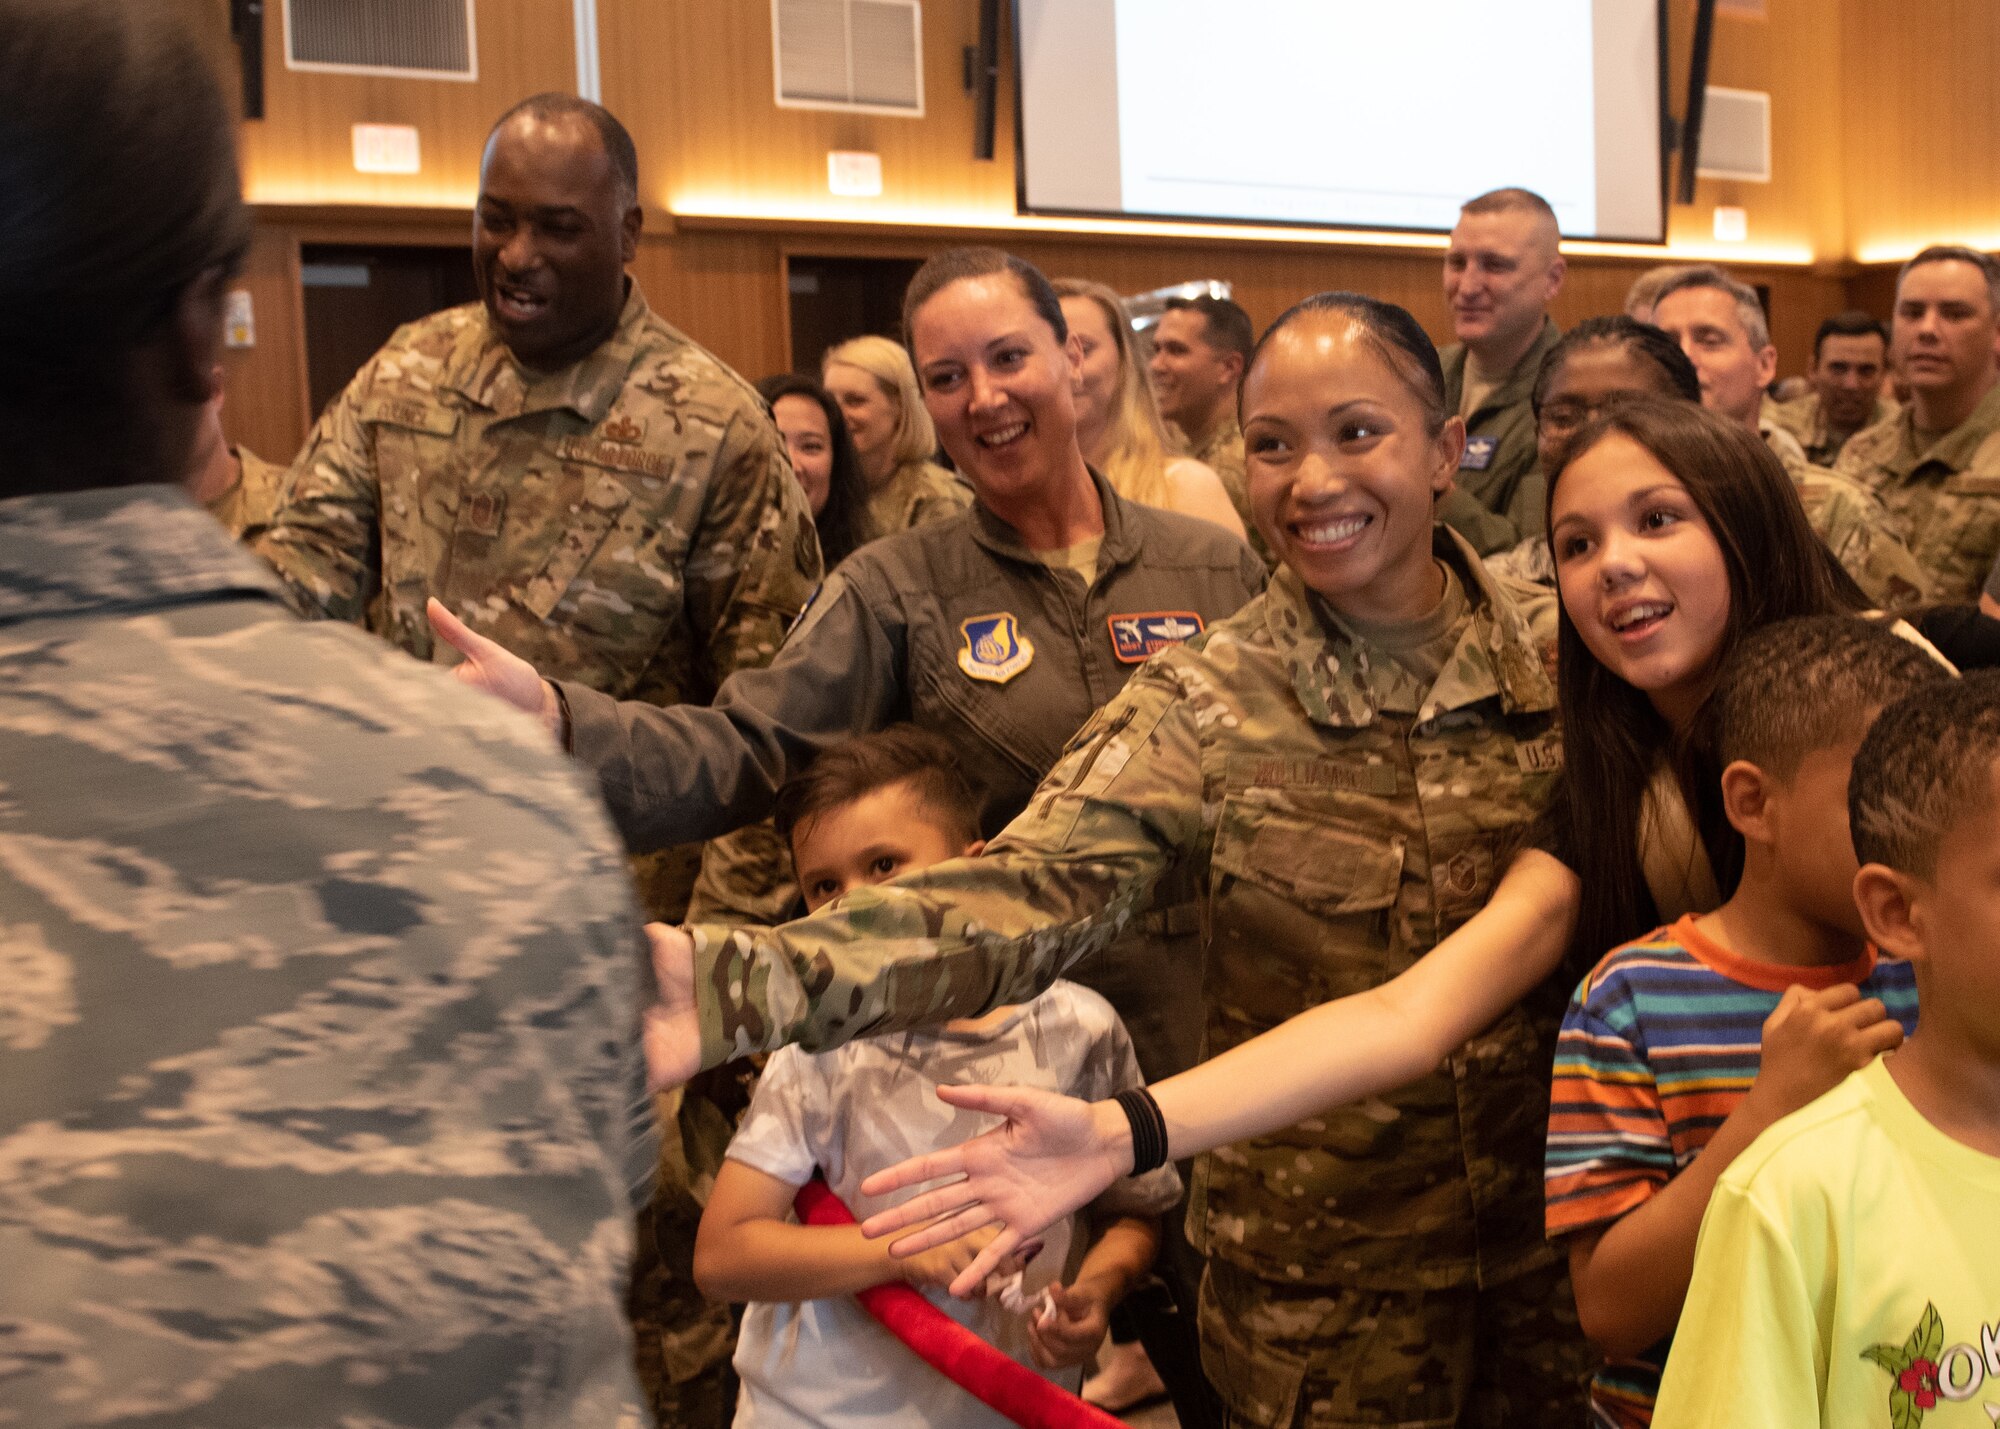 As the technical sergeants promote to the highest tier of the enlisted force, they are charged, trained and equipped to lead junior NCOs and Airmen into capable leaders of tomorrow.